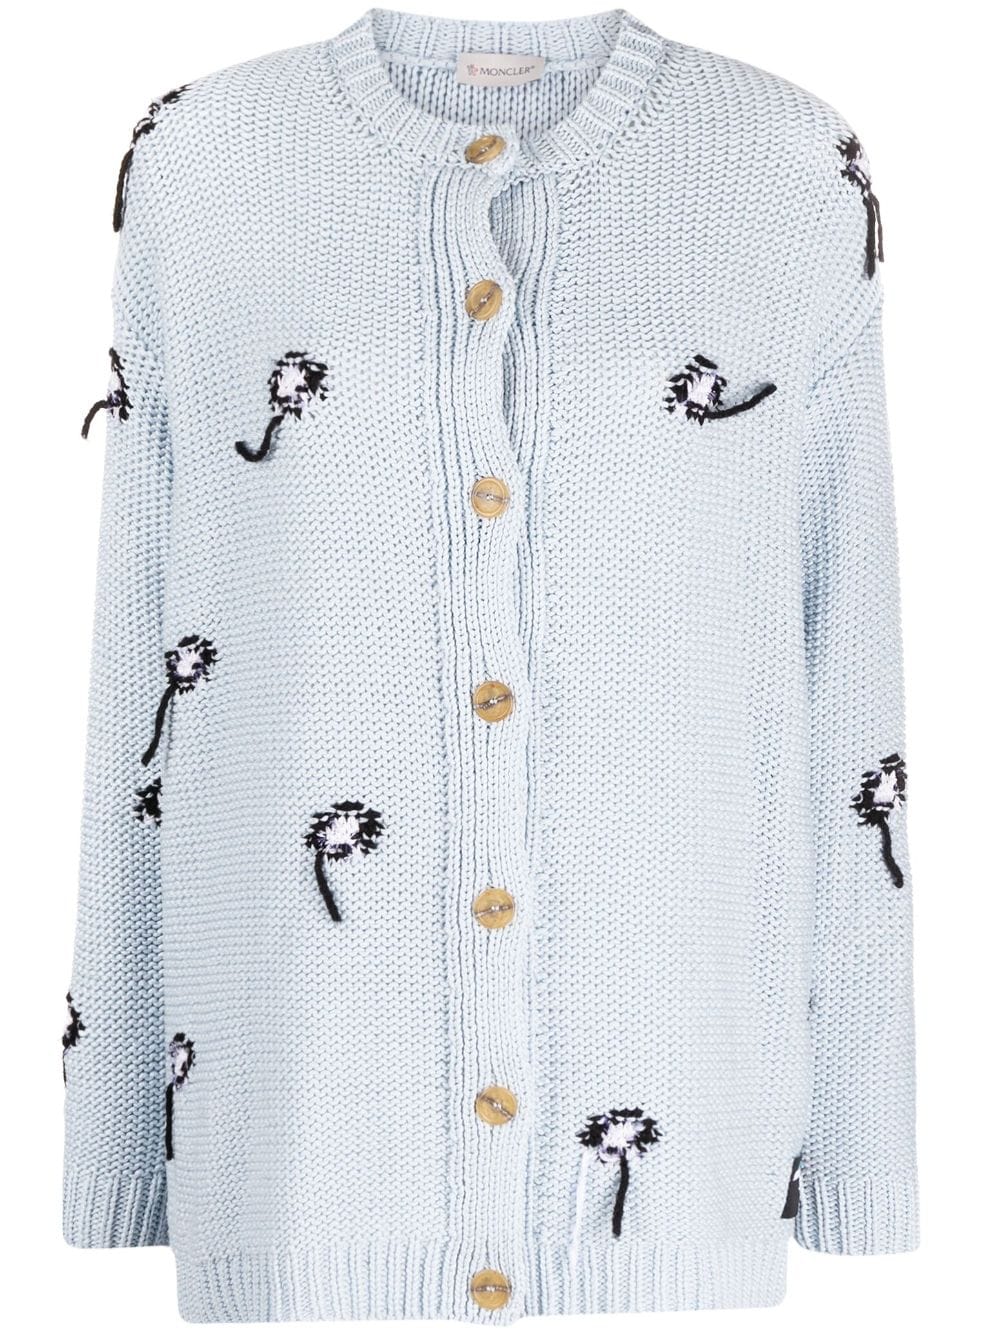 Moncler x Peanuts knitted cardigan - Blue von Moncler